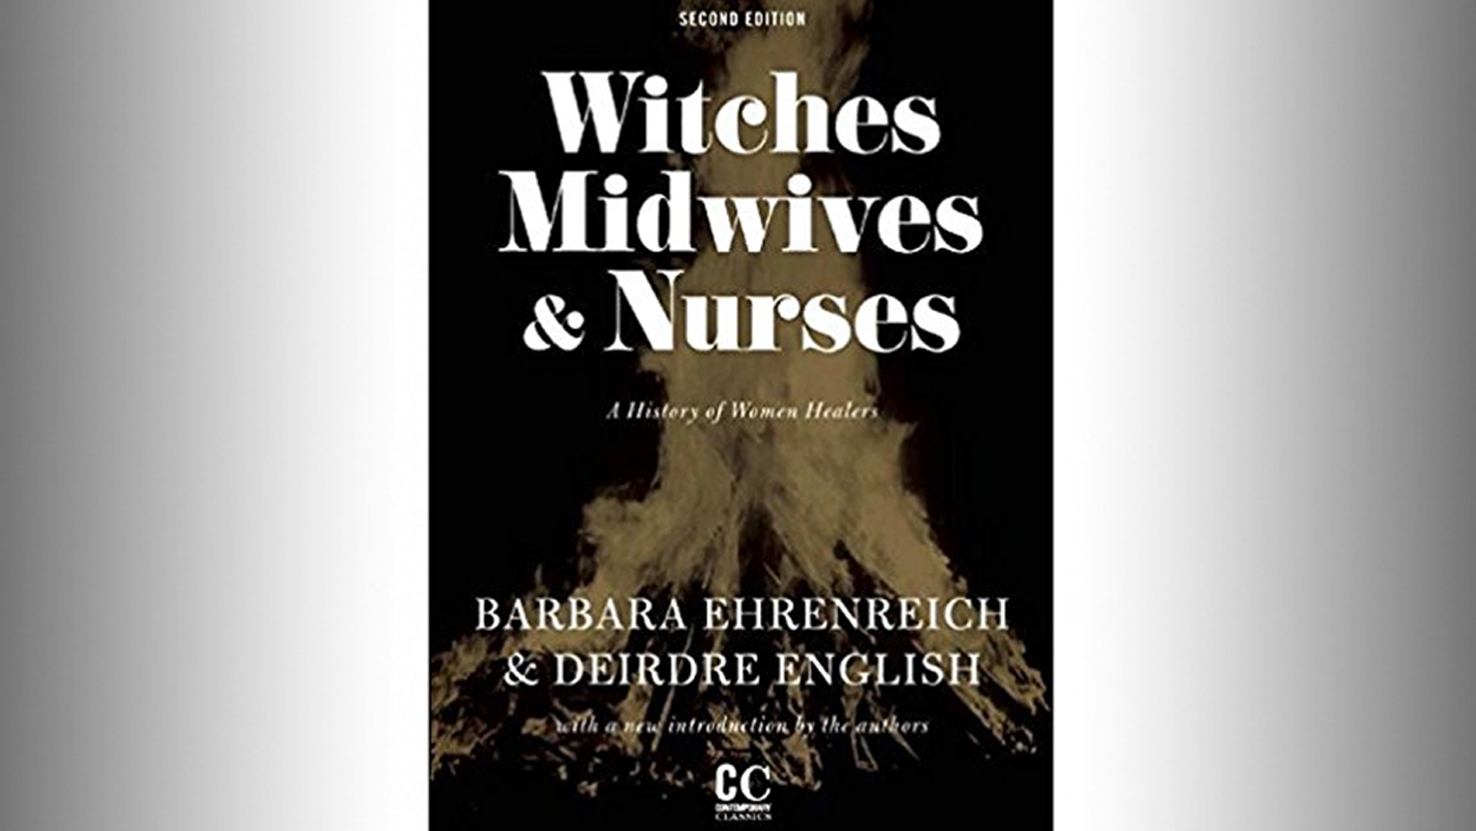 Witches, Midwives and Nurses by Barbara Ehrenreich